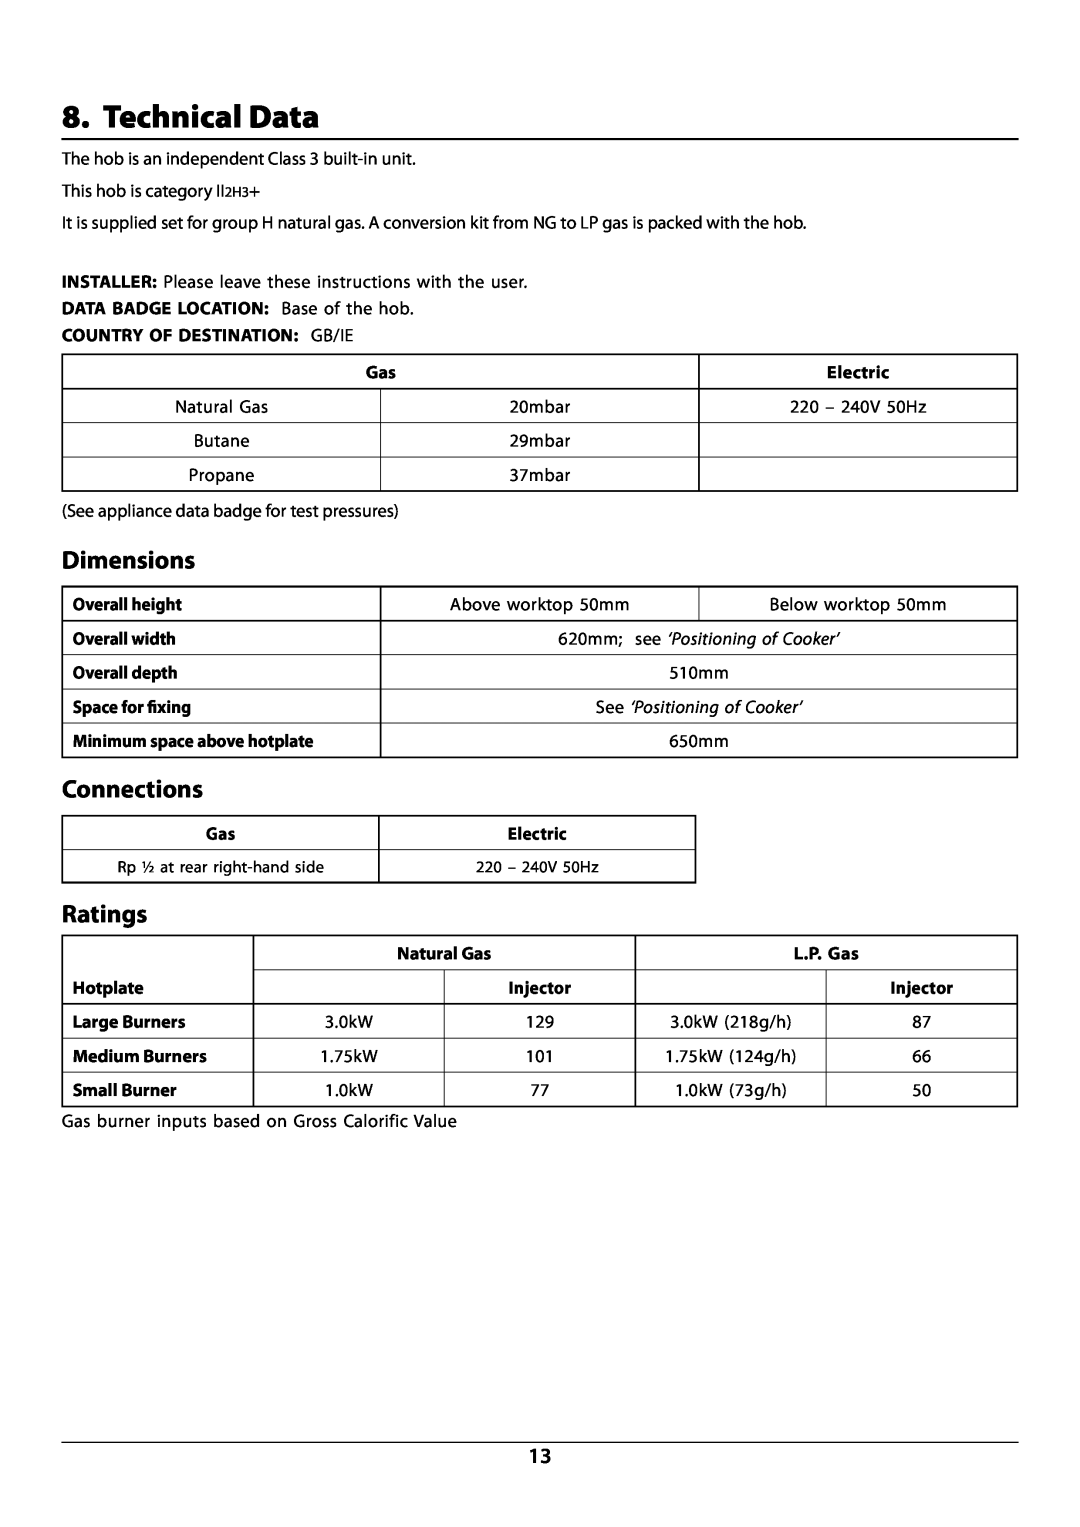 Rangemaster Technical Data, Dimensions, Connections, Ratings, DocNo.101-0003 - Technical data - RGG60 gas hob, Electric 